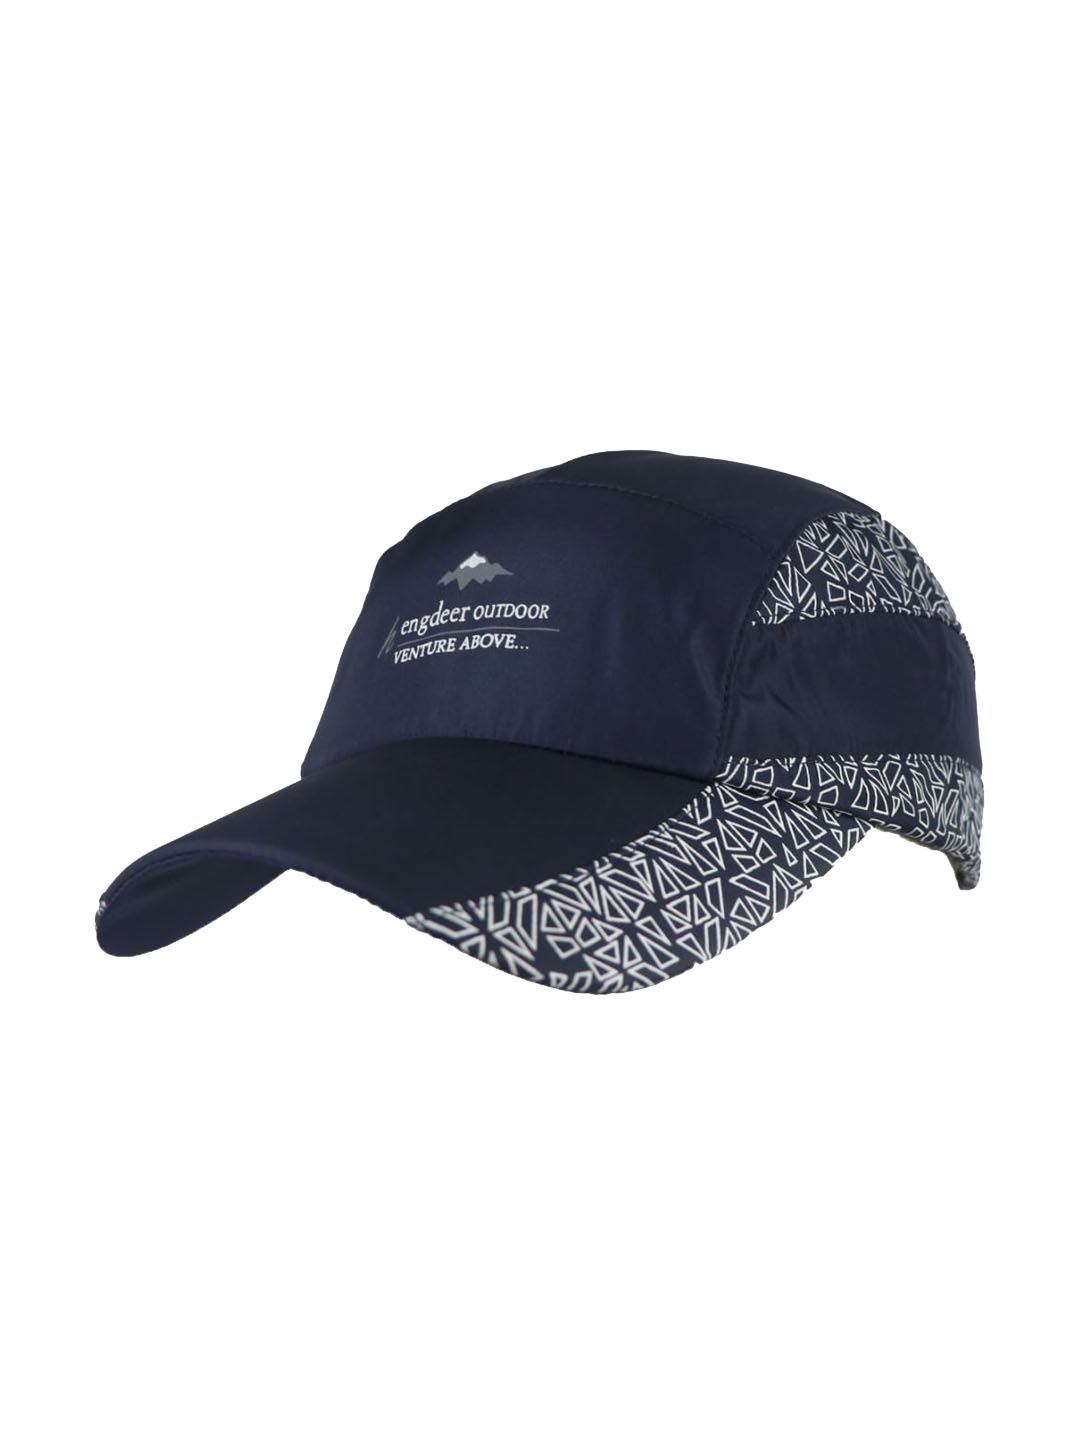 iSWEVEN Unisex Blue & White Printed Baseball Cap Price in India